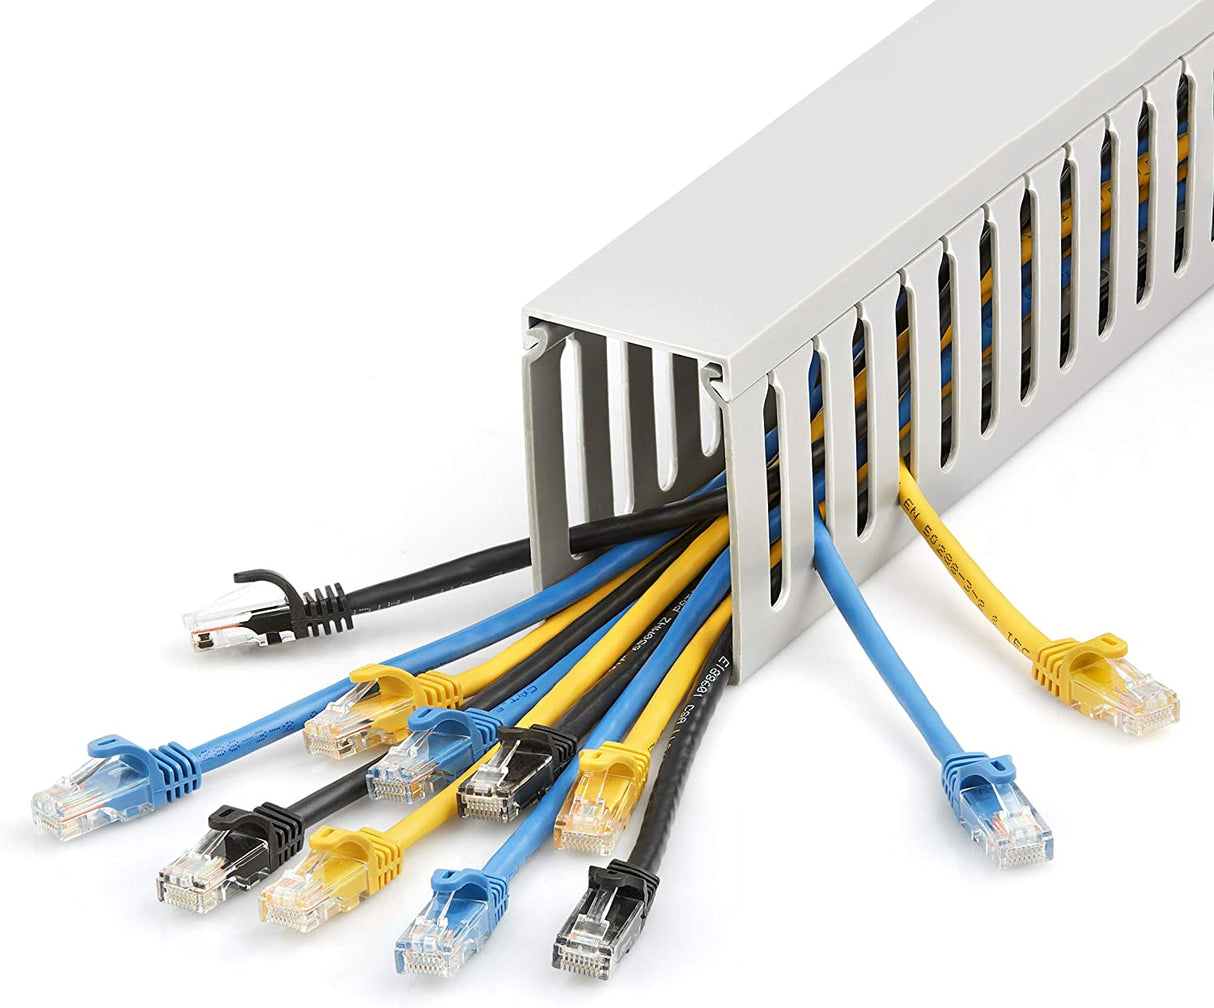 StarTech.com Cable Management Raceway w/Parallel Slots 78in - Network Cable Hider Kit - Slotted Wall Wire Duct System - Cord Concealer Channel - Surface Mount Wiring Channel PVC UL Rated (CBMWD5075) 2.0 in (5 cm) x 3.0 in (75 mm)